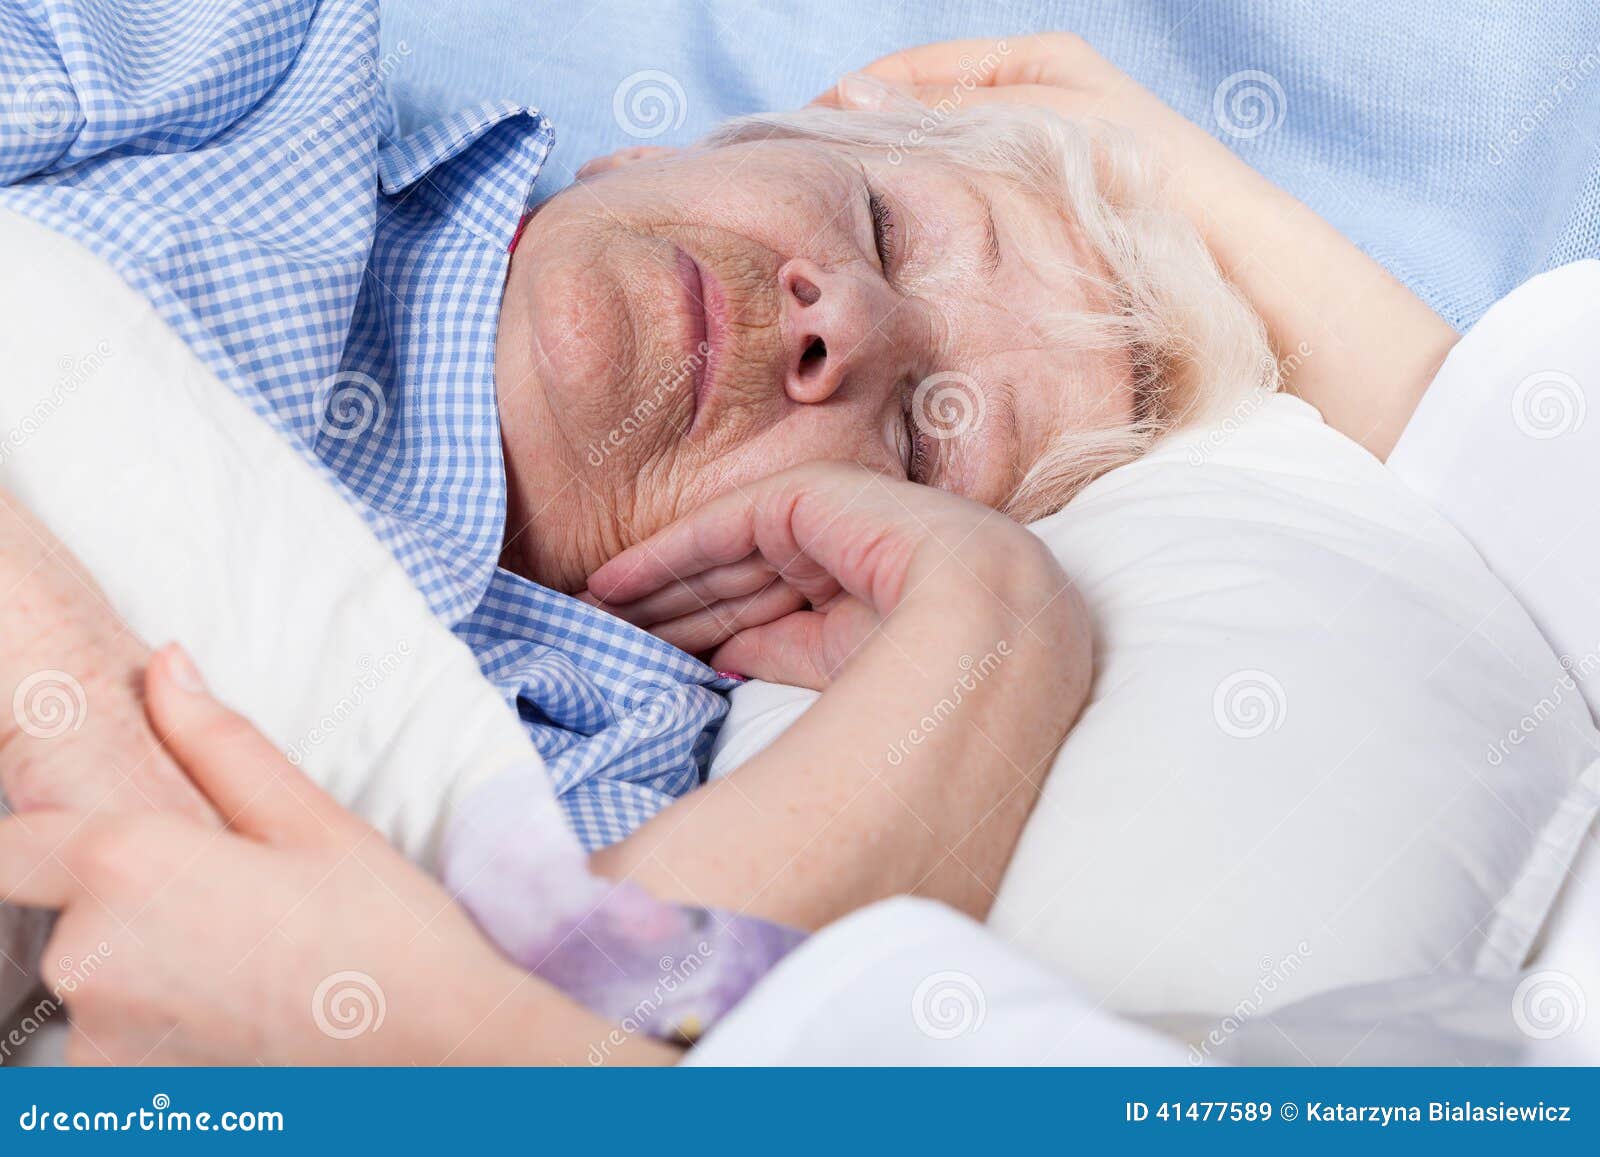 Old Ledy Young Bacha Sex - 35,898 Lady Sick Stock Photos - Free & Royalty-Free Stock Photos from  Dreamstime